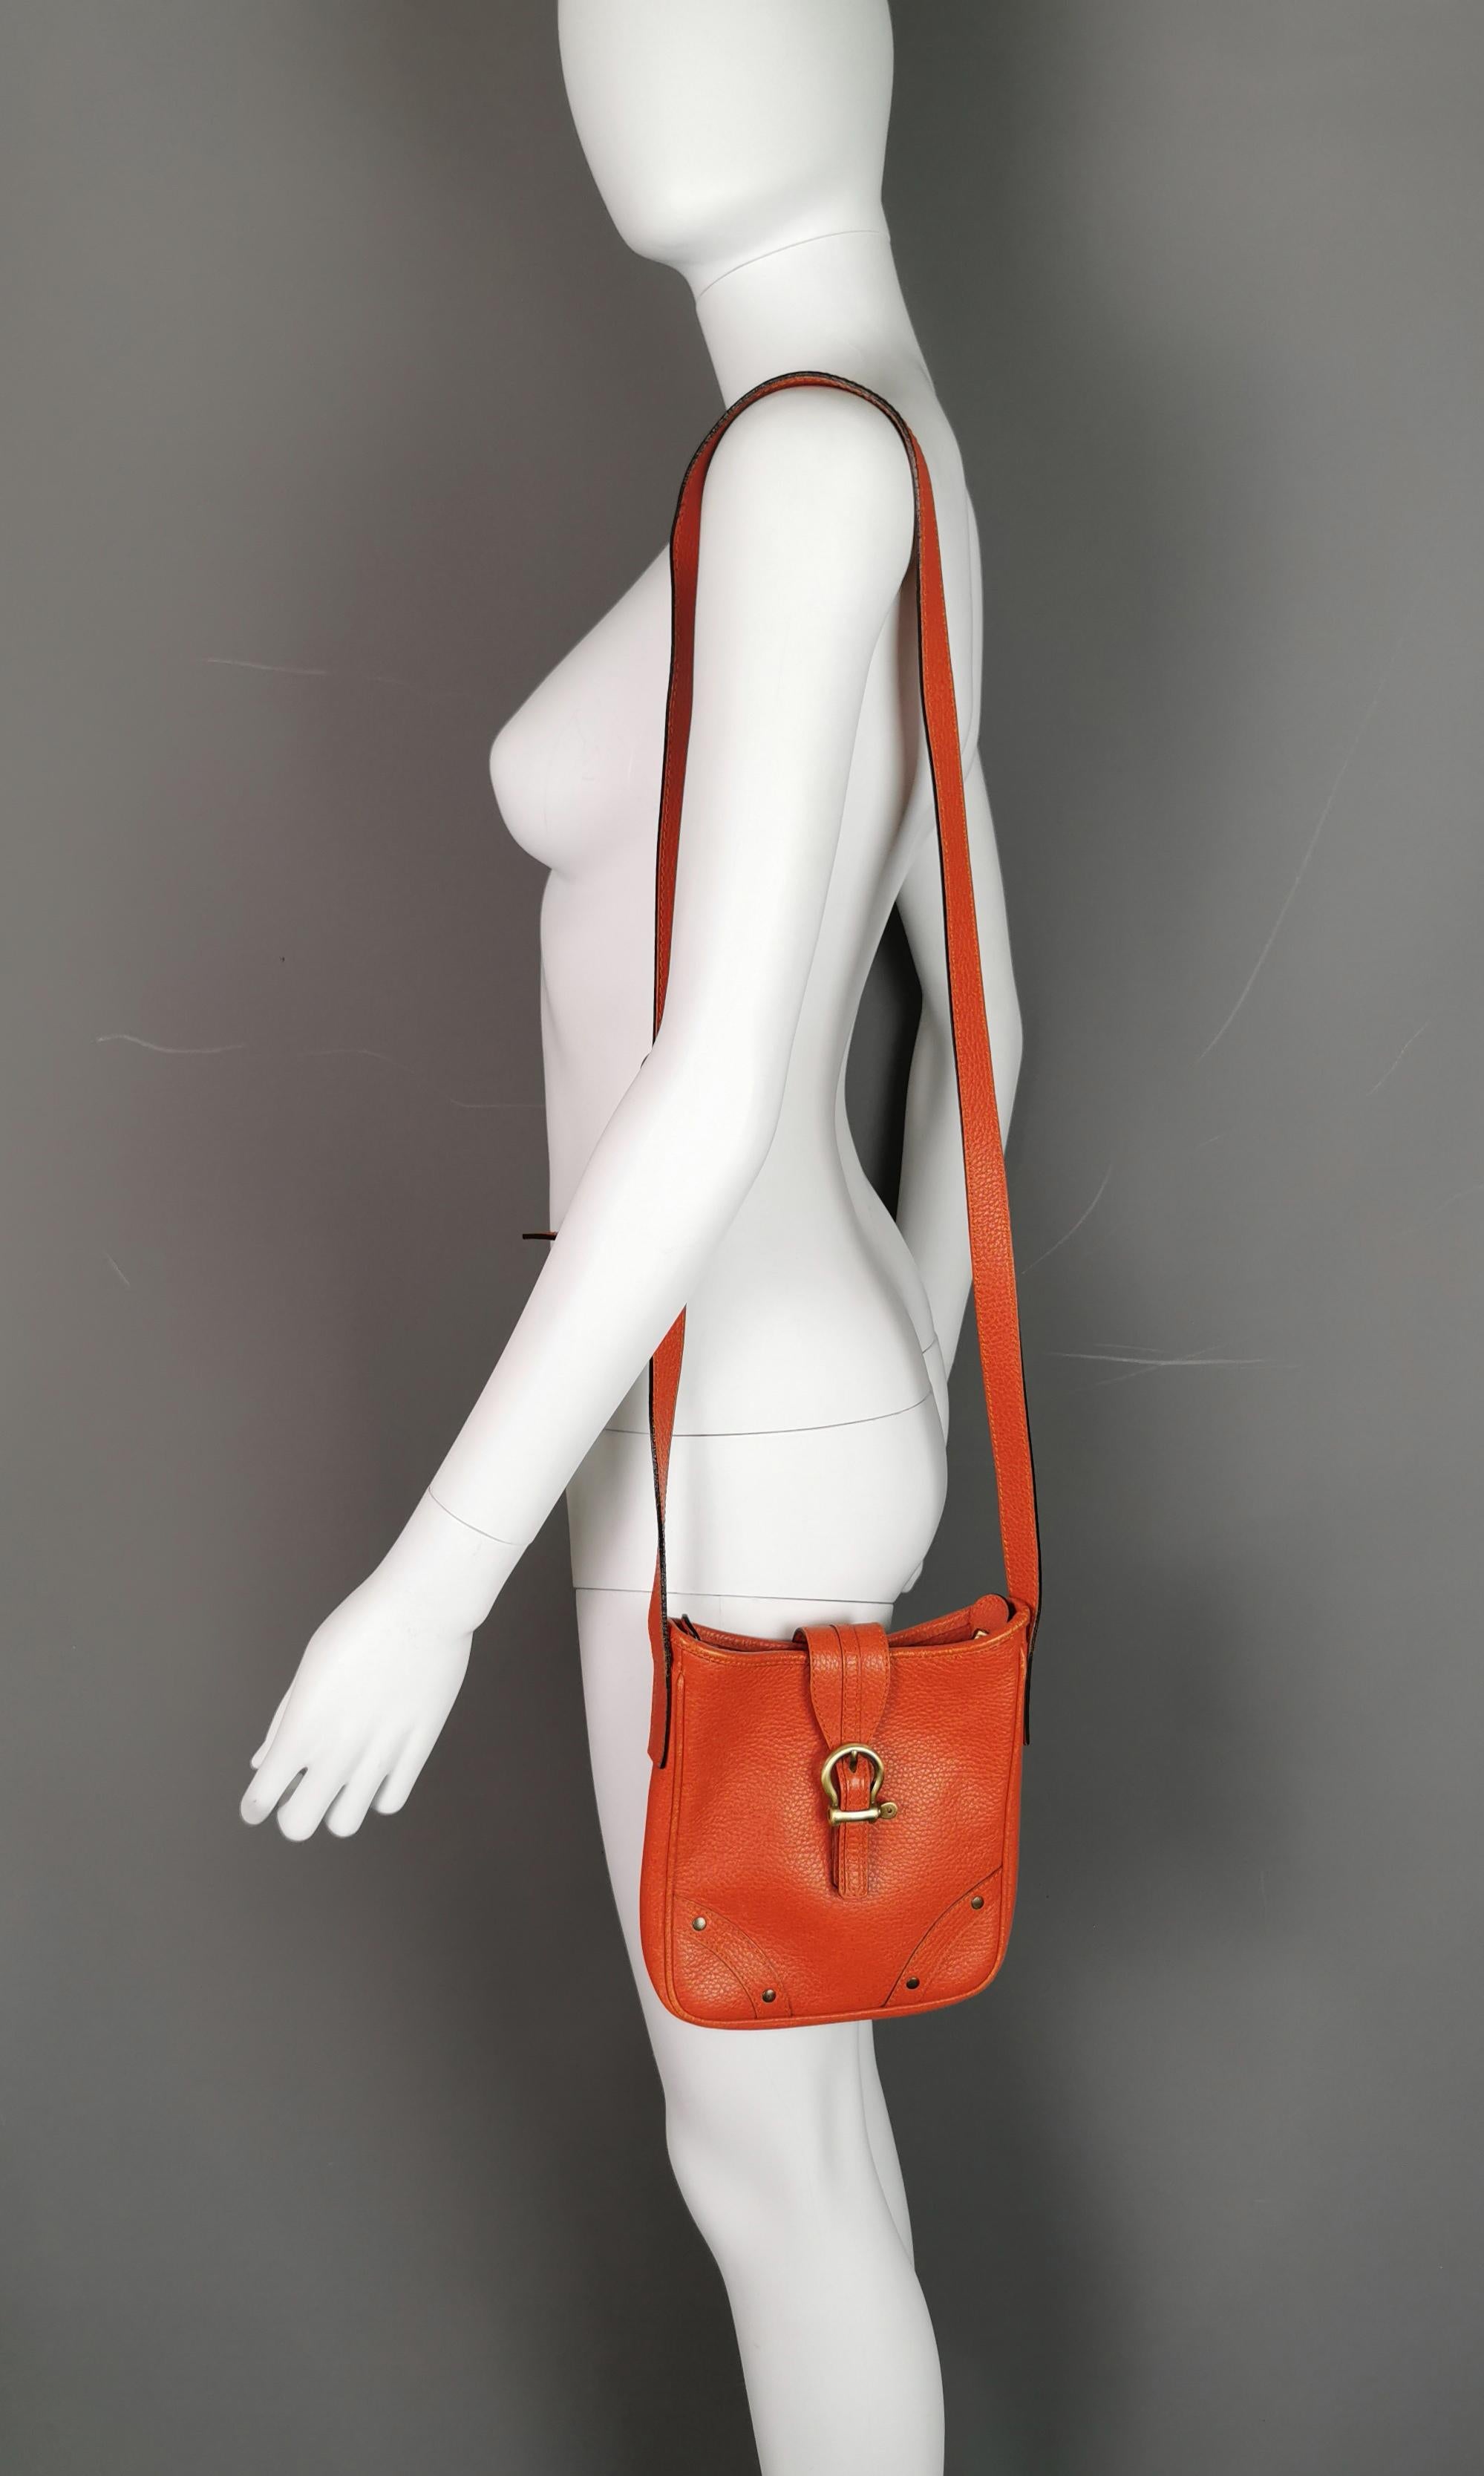 A stylish vintage Burberry orange pebble leather handbag or shoulder bag.

It is a small / medium sized bag, perfect for shopping trips and daily use.

It has lovely supple soft pebble leather in a vibrant juicy orange with signature check canvas